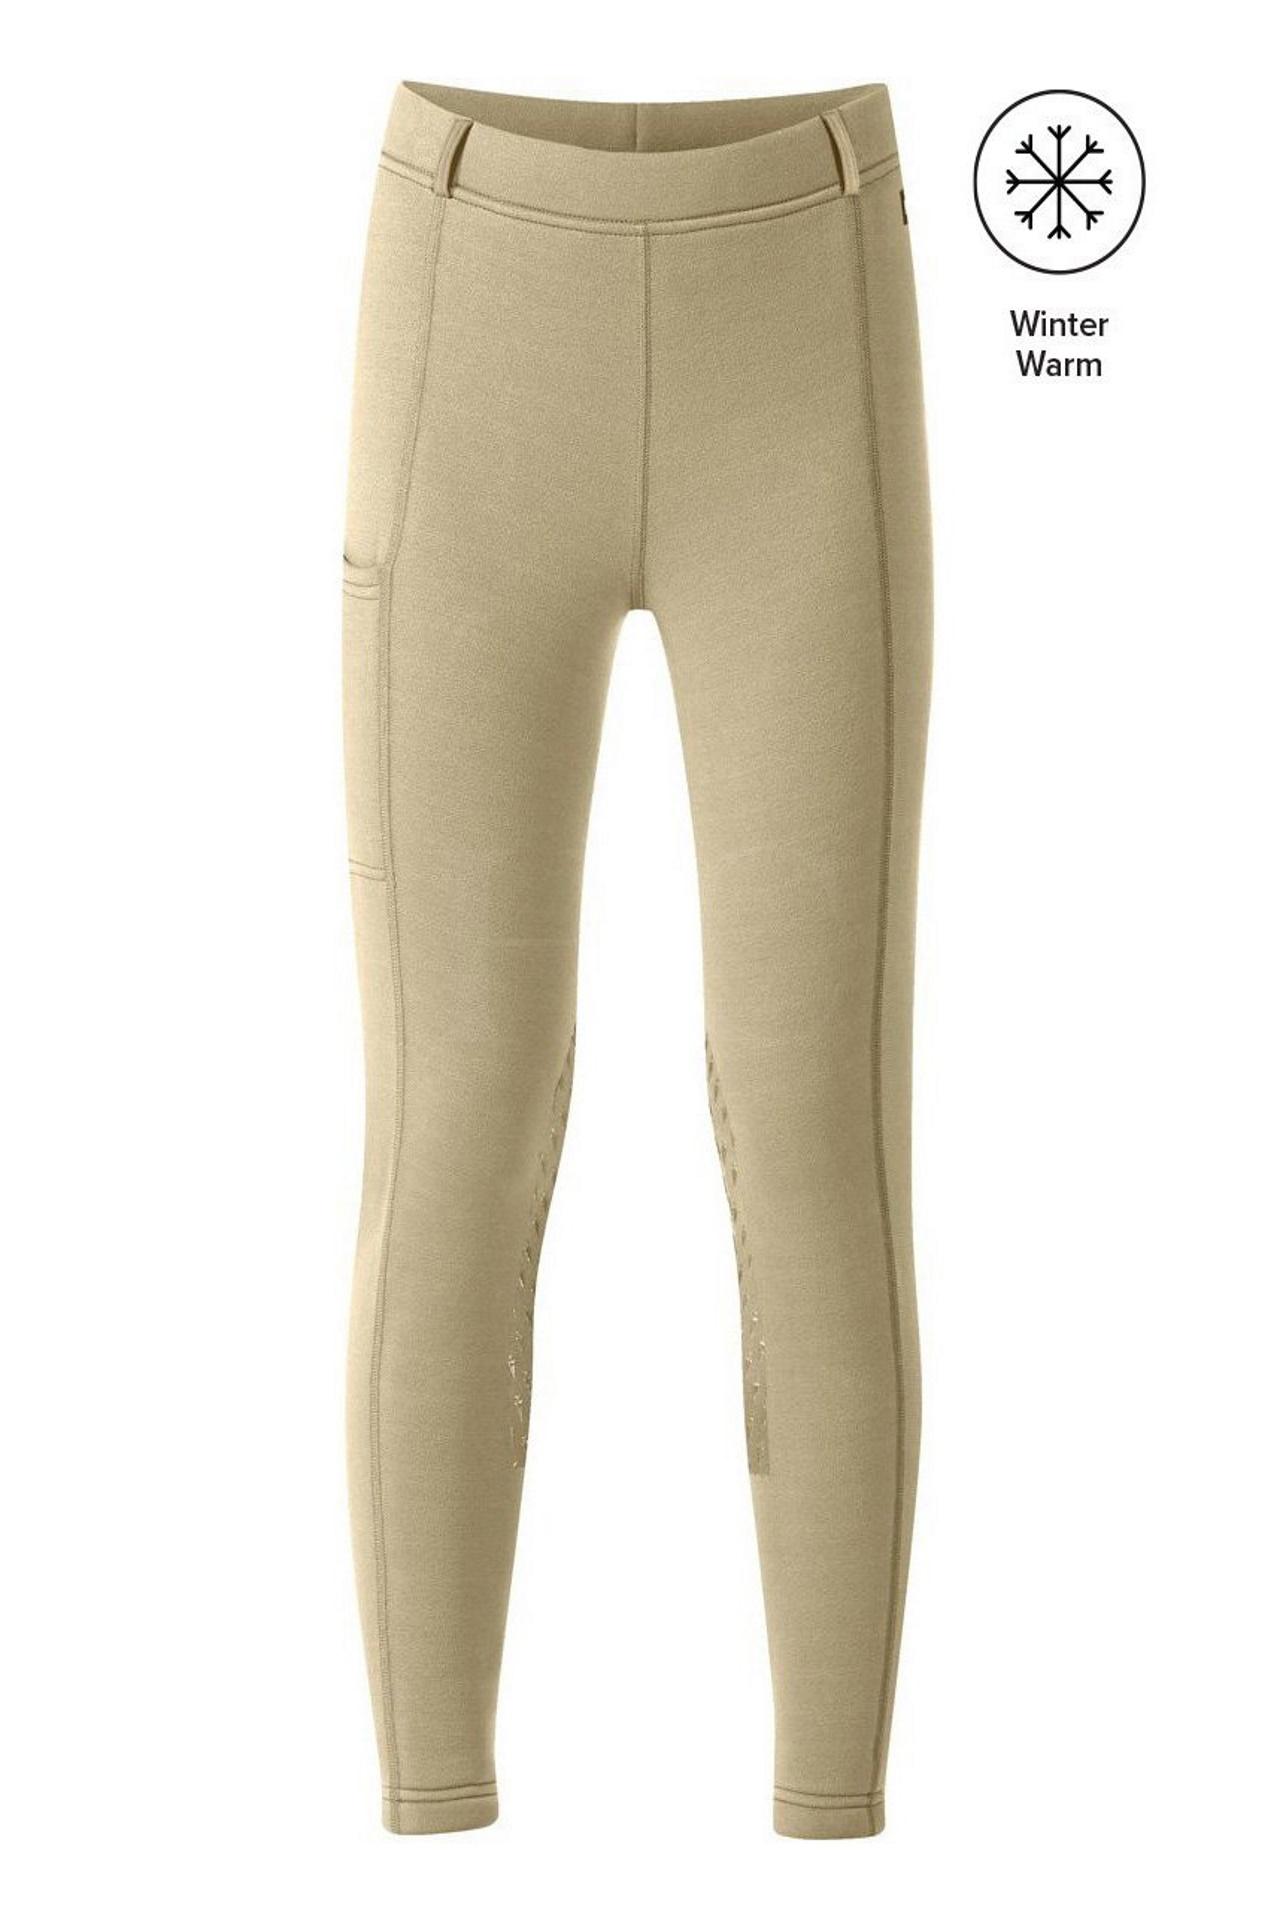 Horse Country Carrot - Kids Polartec Power Stretch Tight